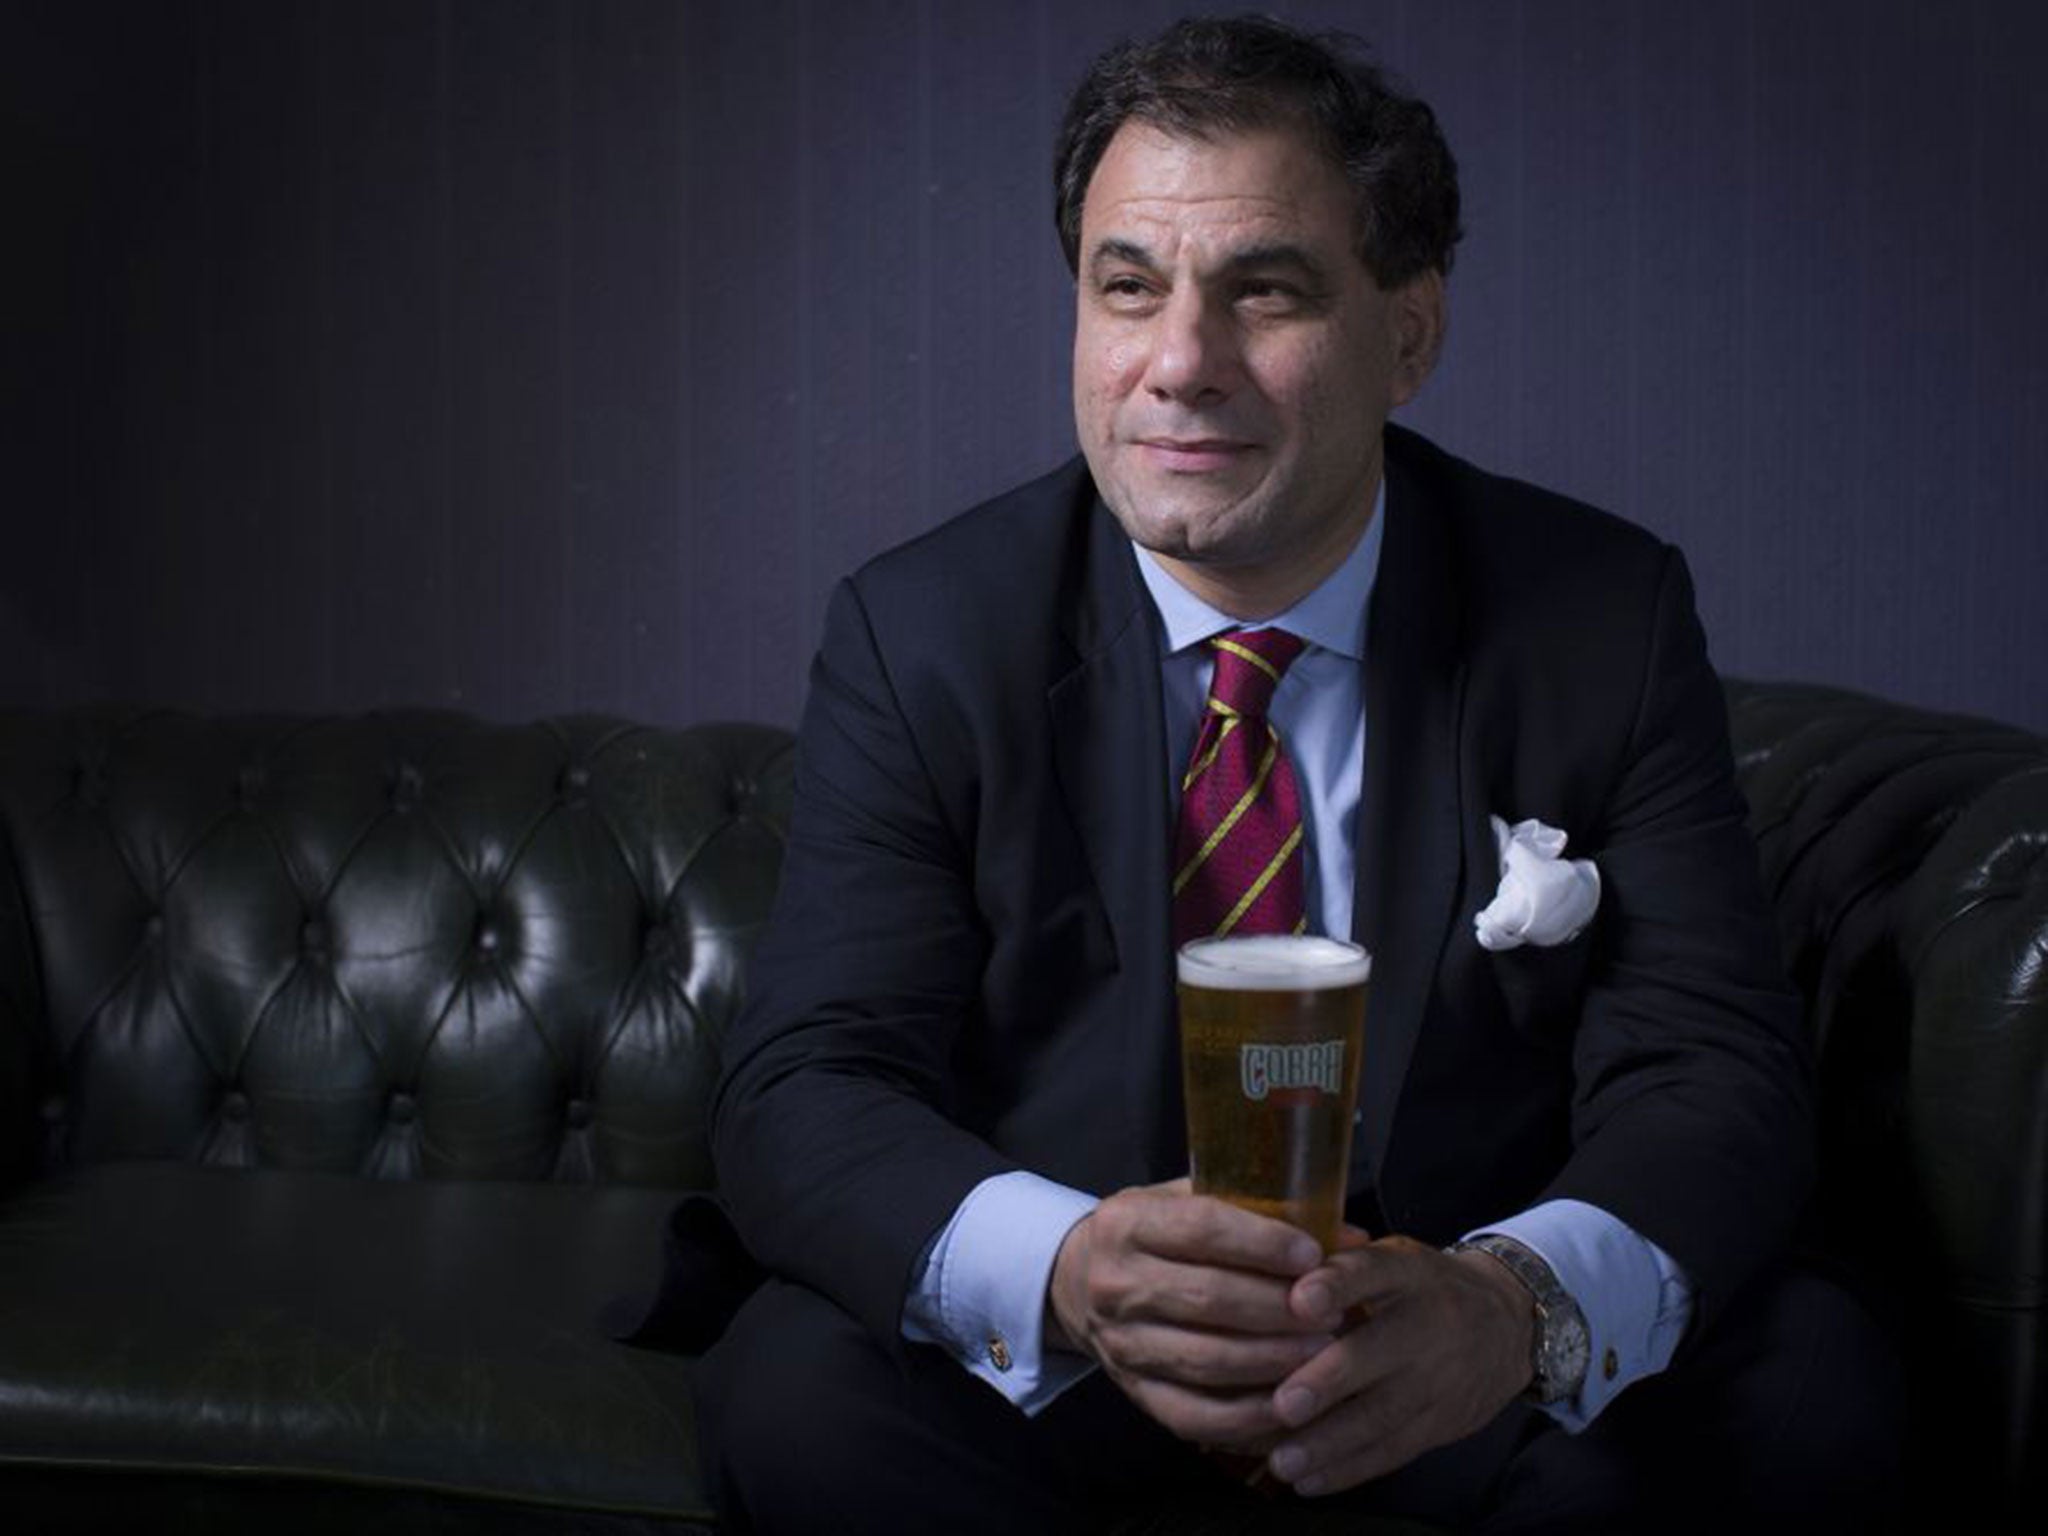 Lord Bilimoria had the idea for a beer that went well with curry when he was a student at Cambridge